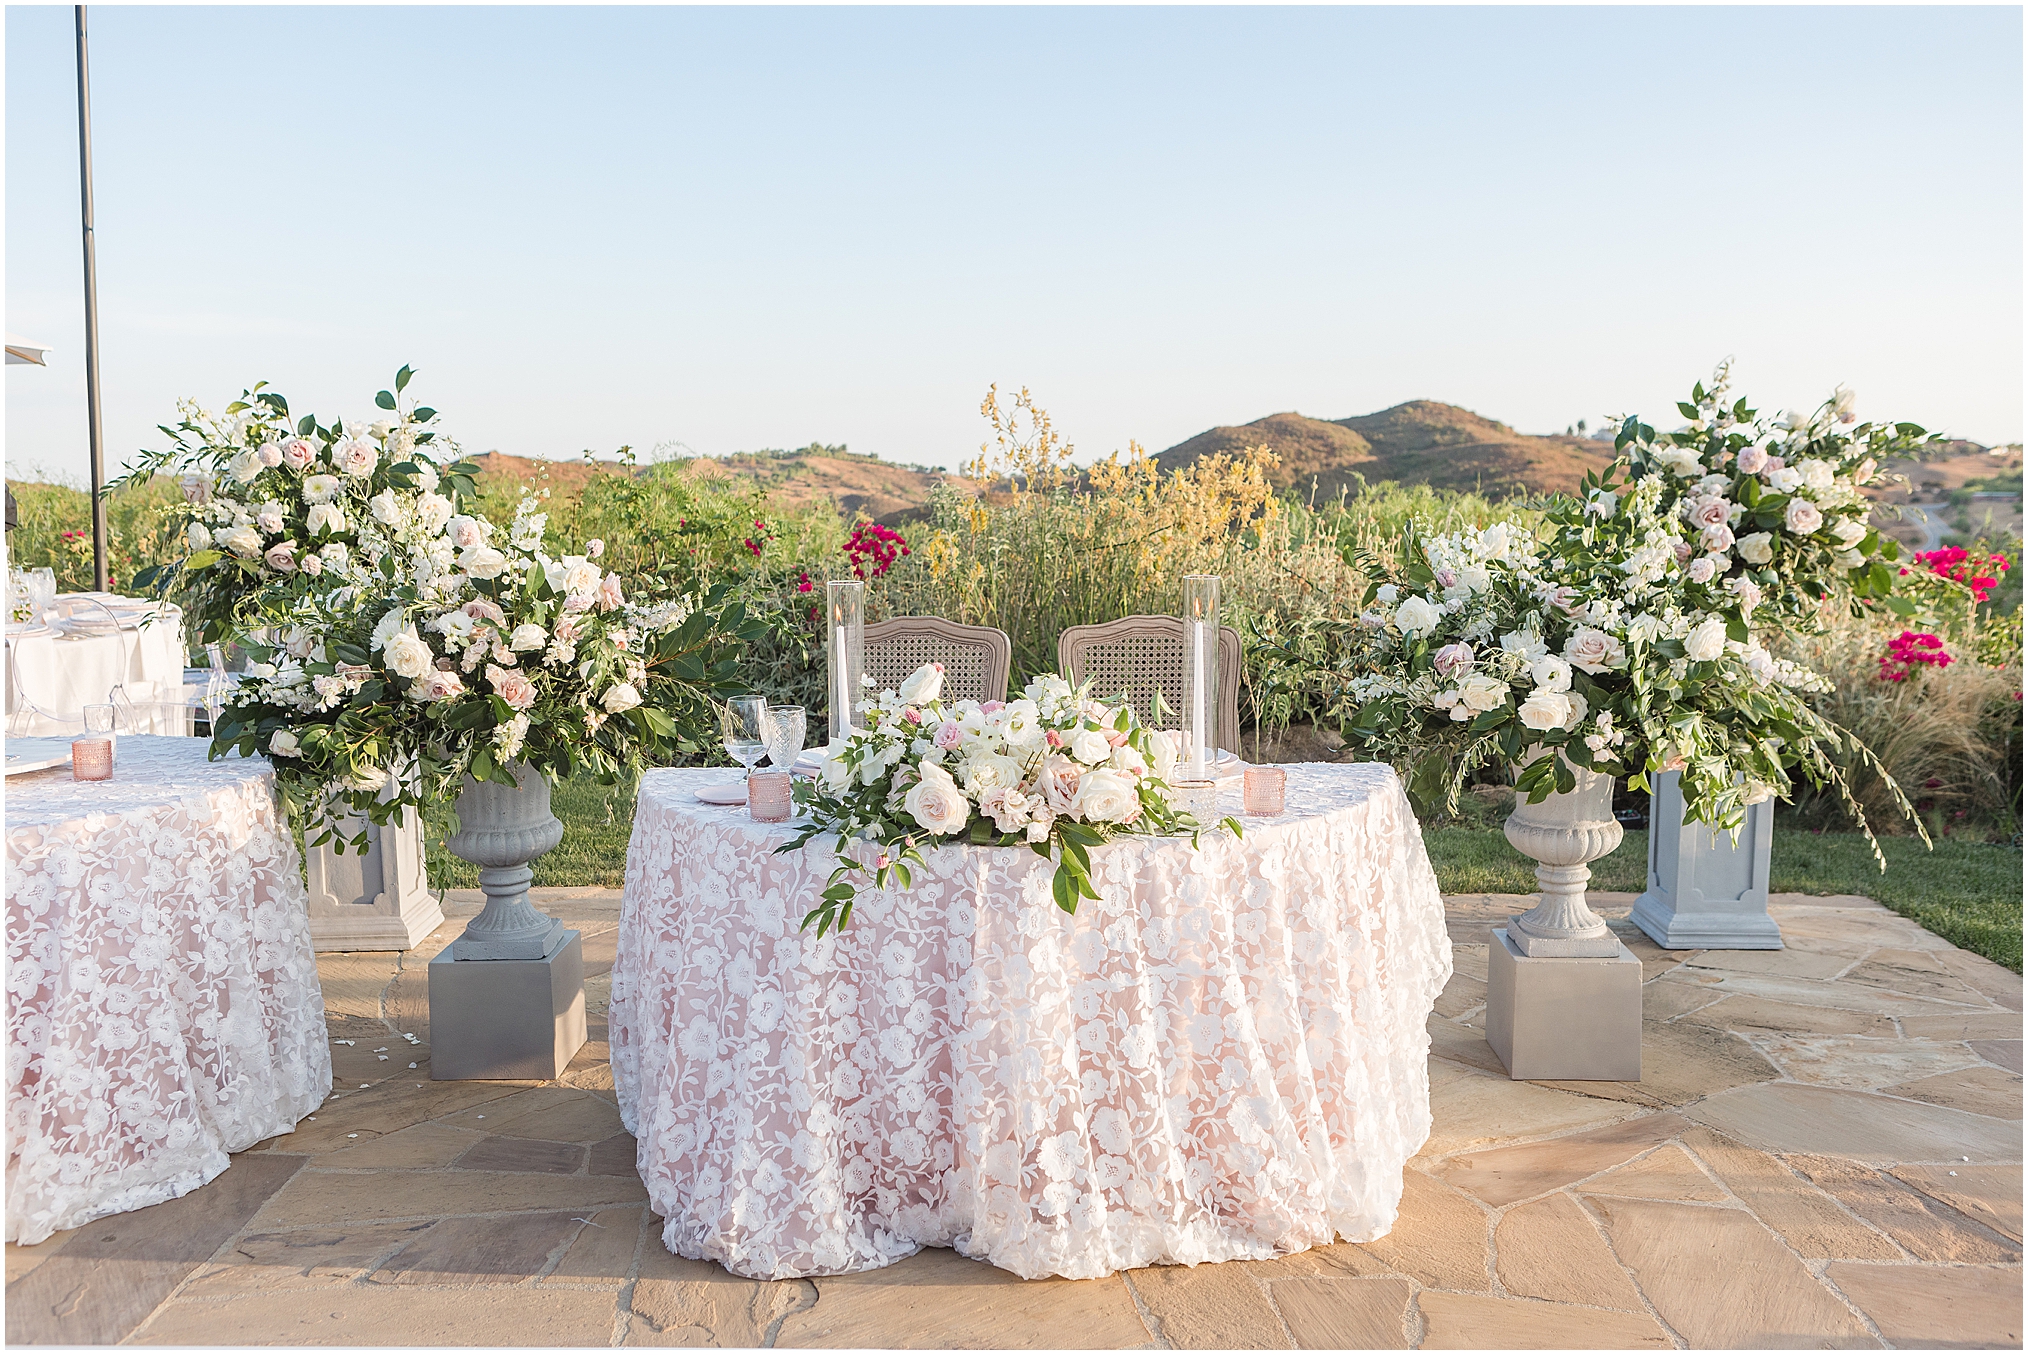 An intimate summer Malibu Canyon wedding in early September. Tiffany and Jason say "I do!" on a hilltop with 360 views of Malibu Canyon!